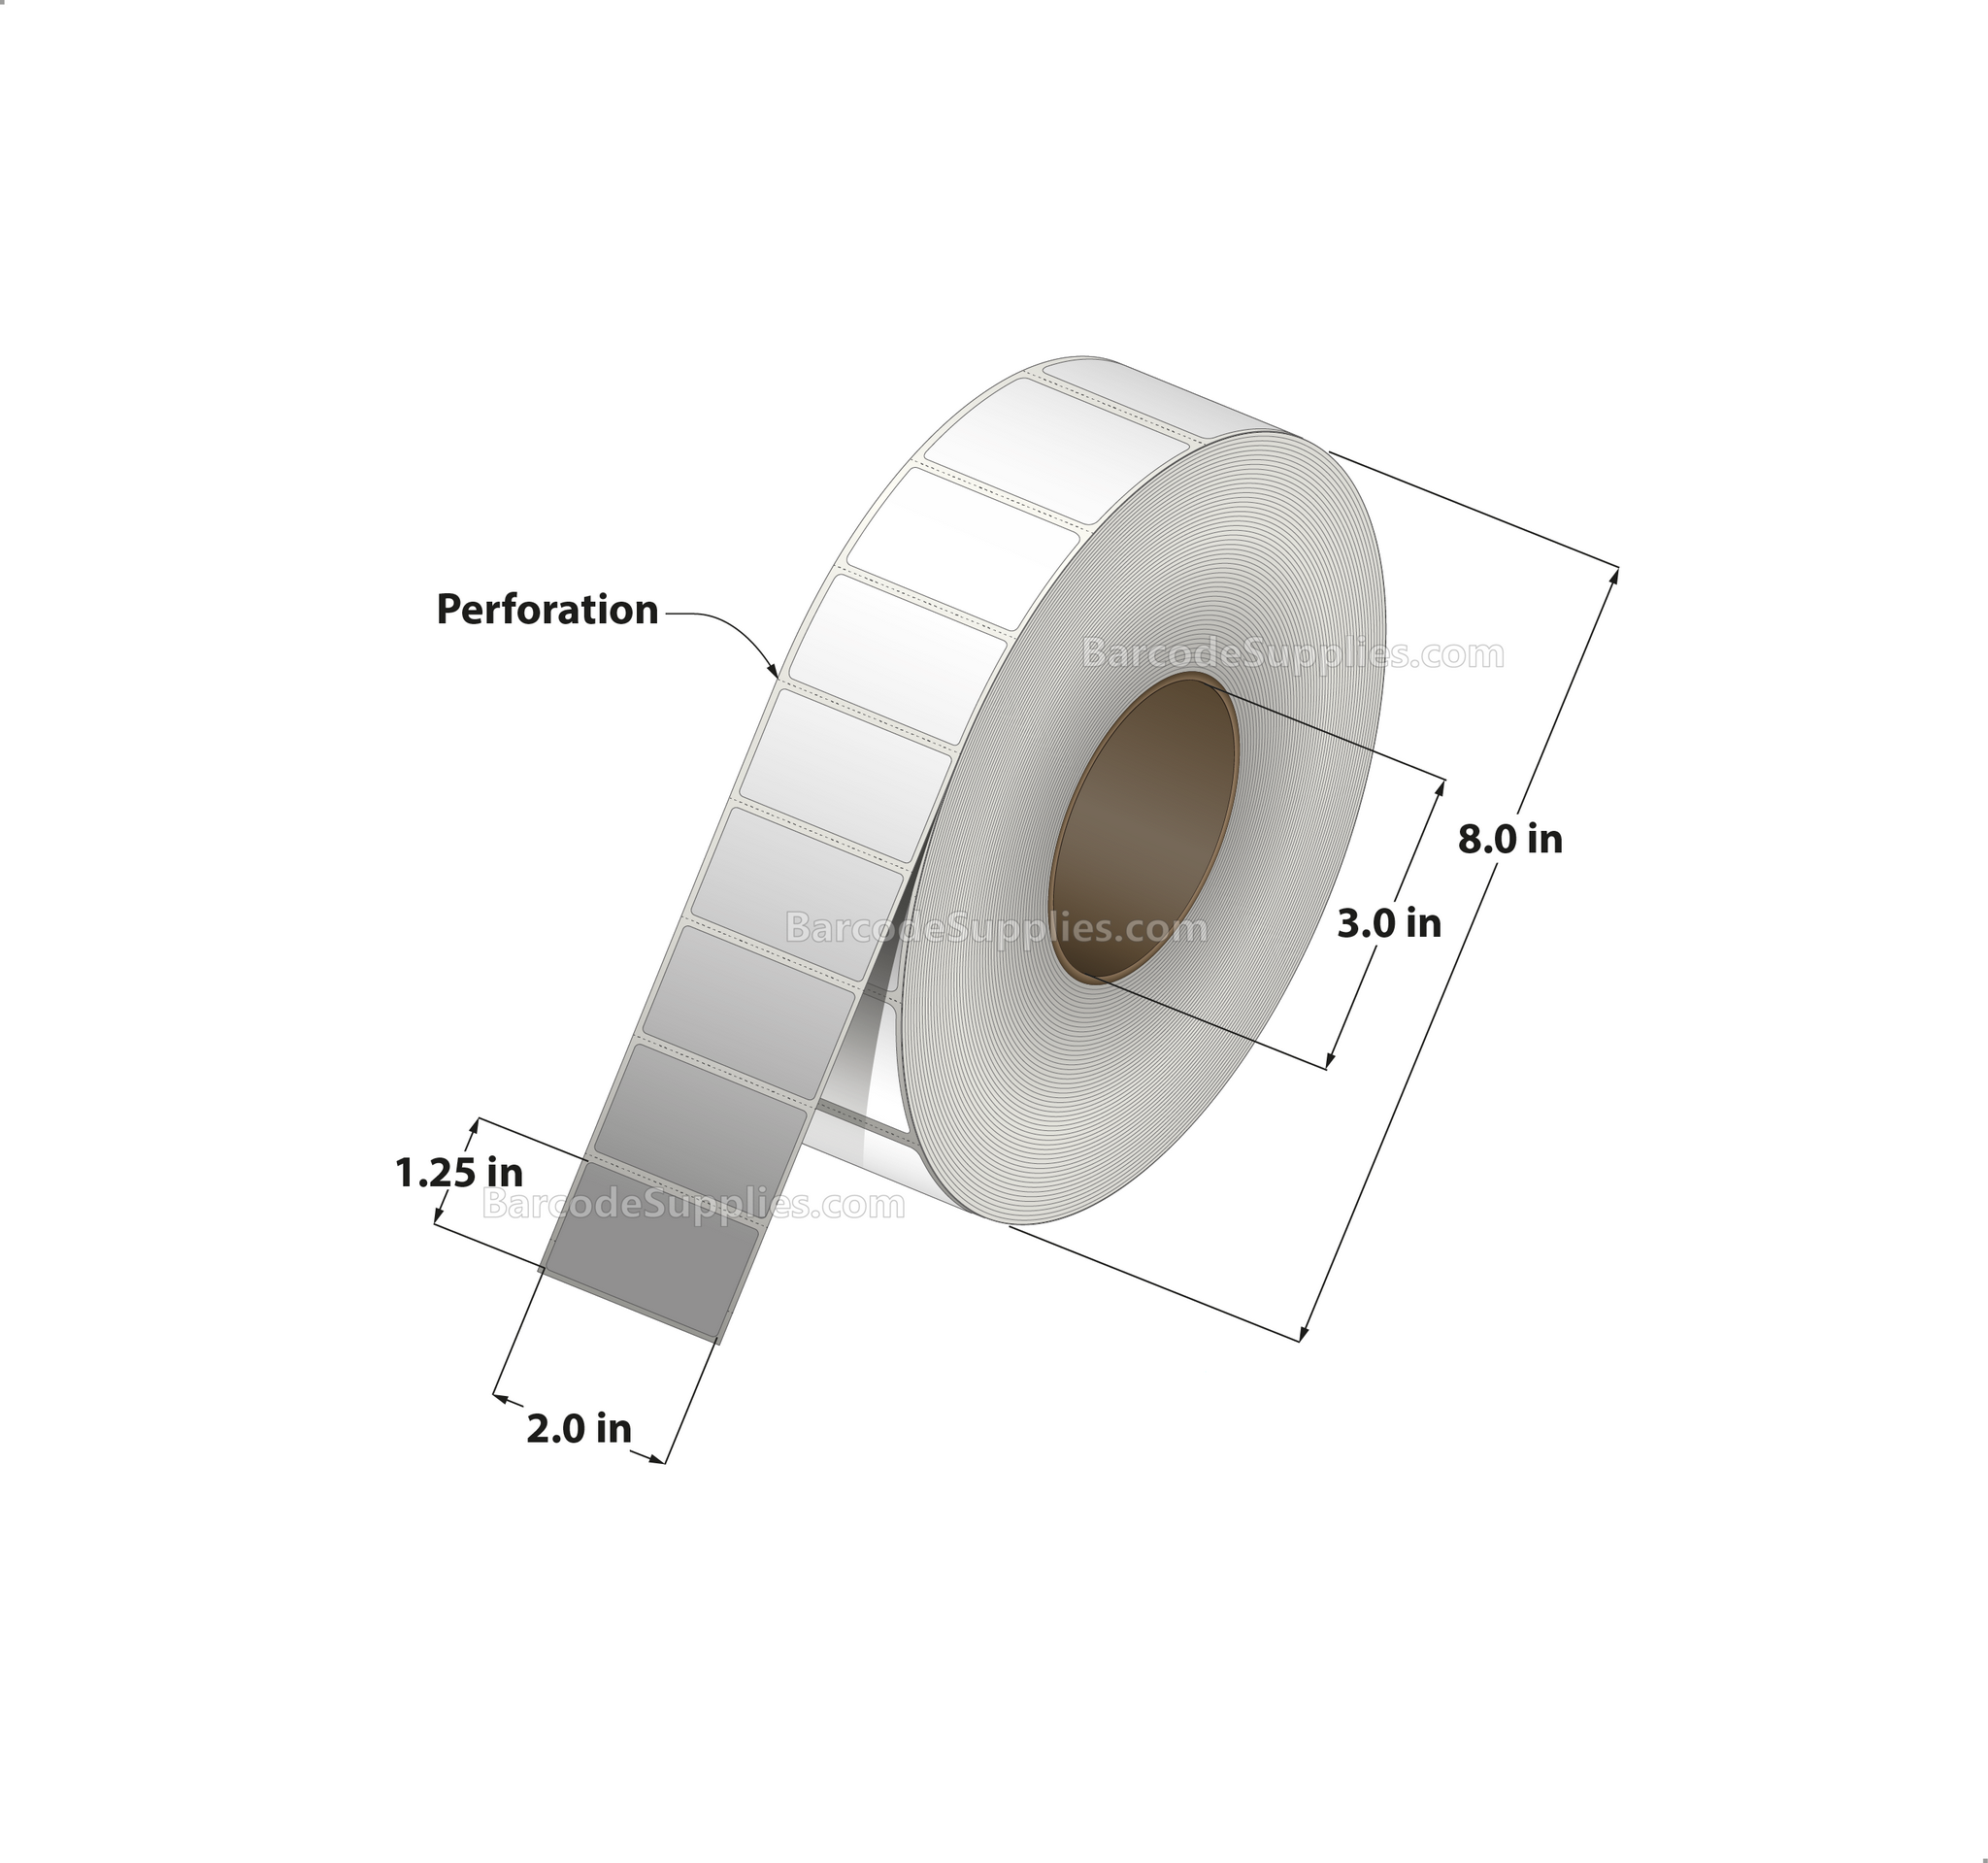 2 x 1.25 Thermal Transfer White Labels With Permanent Adhesive - Perforated - 4450 Labels Per Roll - Carton Of 8 Rolls - 35600 Labels Total - MPN: RT-2-125-4450-3